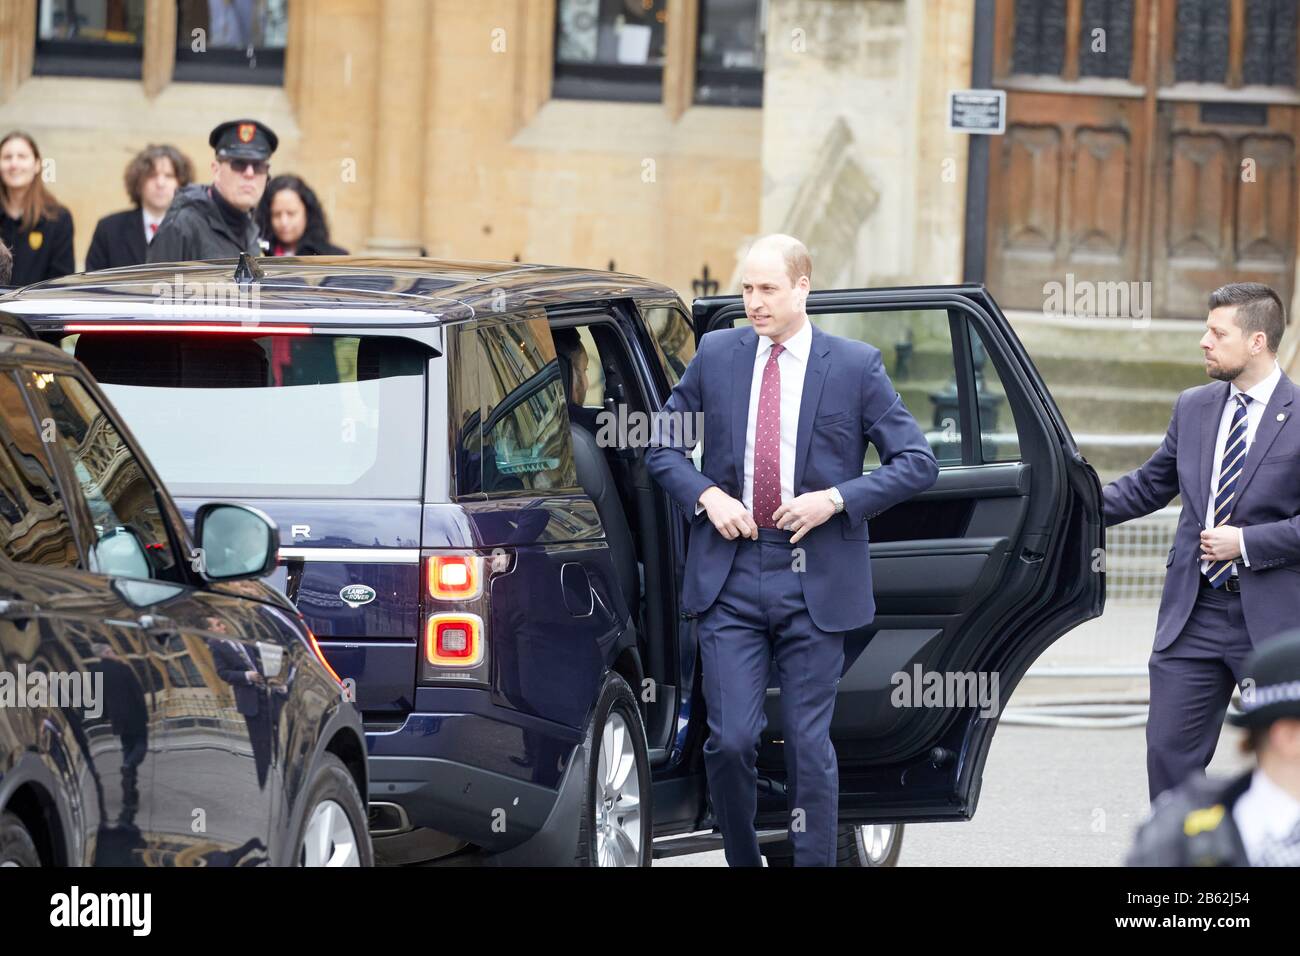 London, U.K. - 9 Mar 2020: Prince William, Duke of Cambridge, arriving for the Commonwealth Day Service at Westminster Abbey. Stock Photo